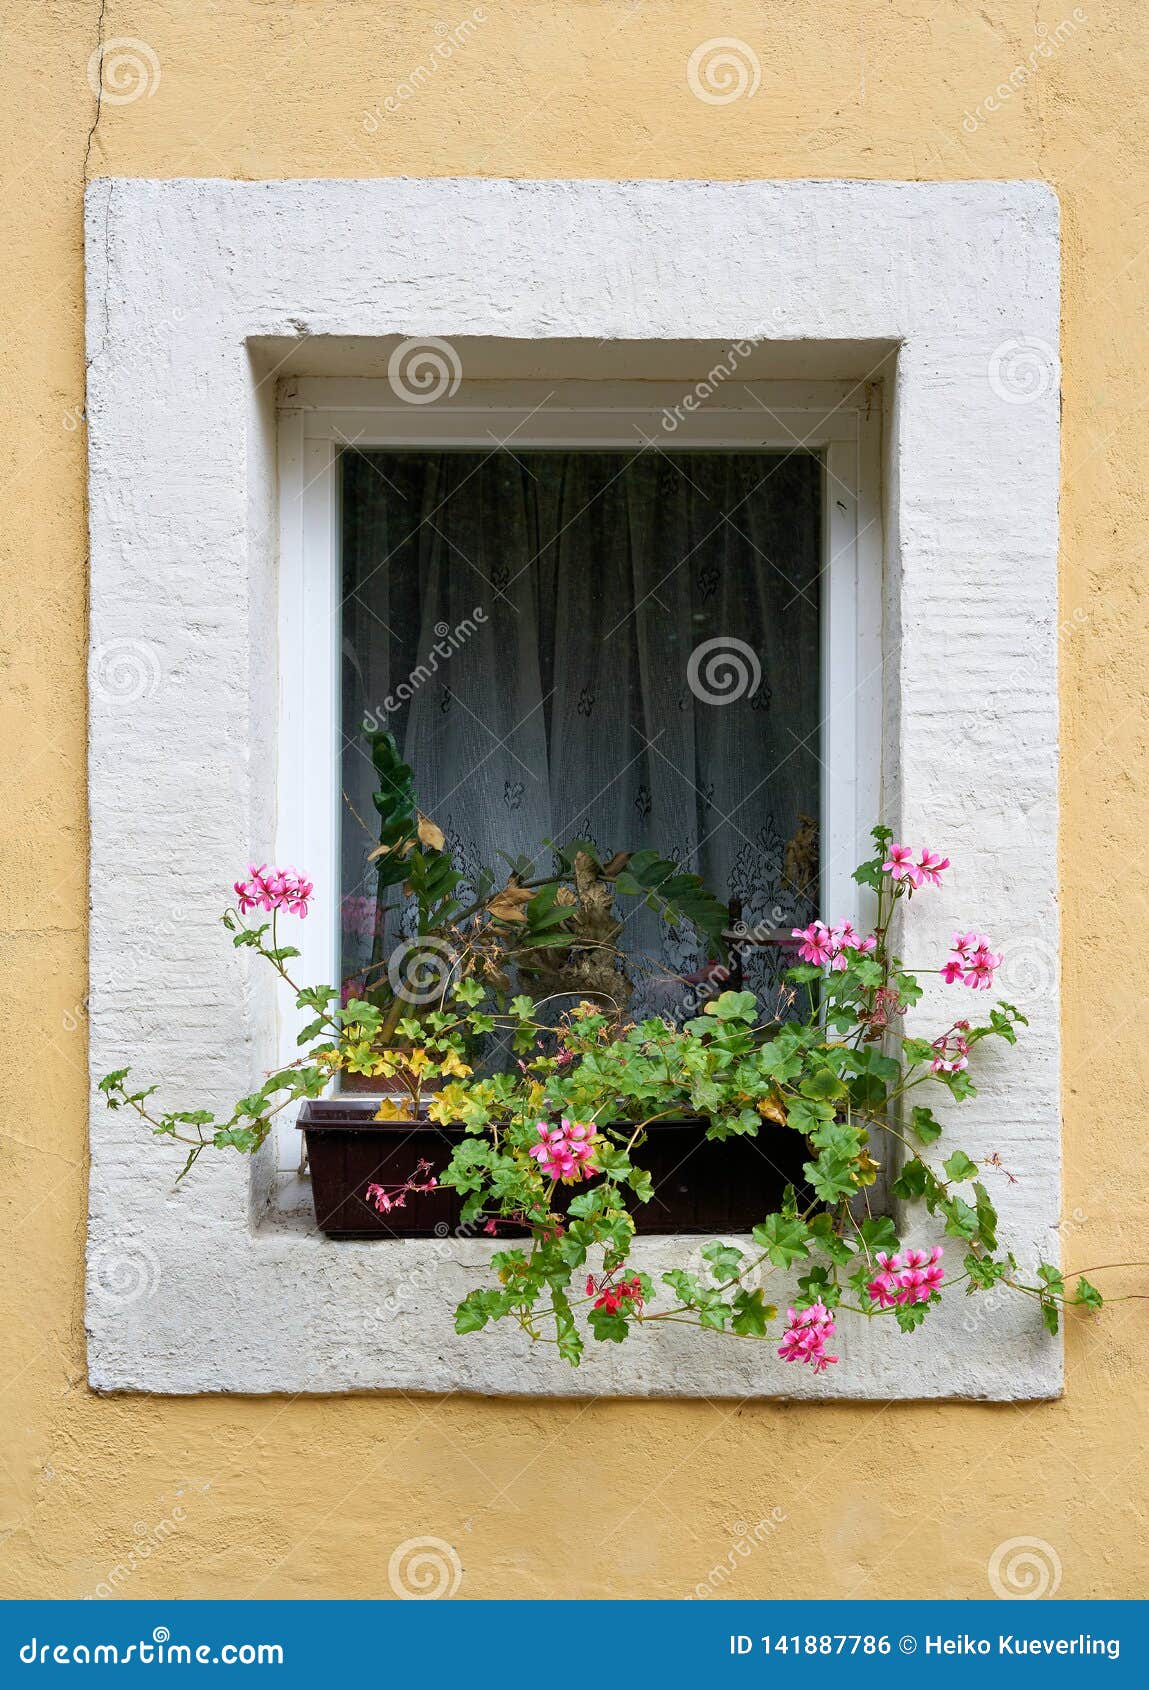 Window of a House with Geraniums Stock Photo - Image of plate, geranium ...